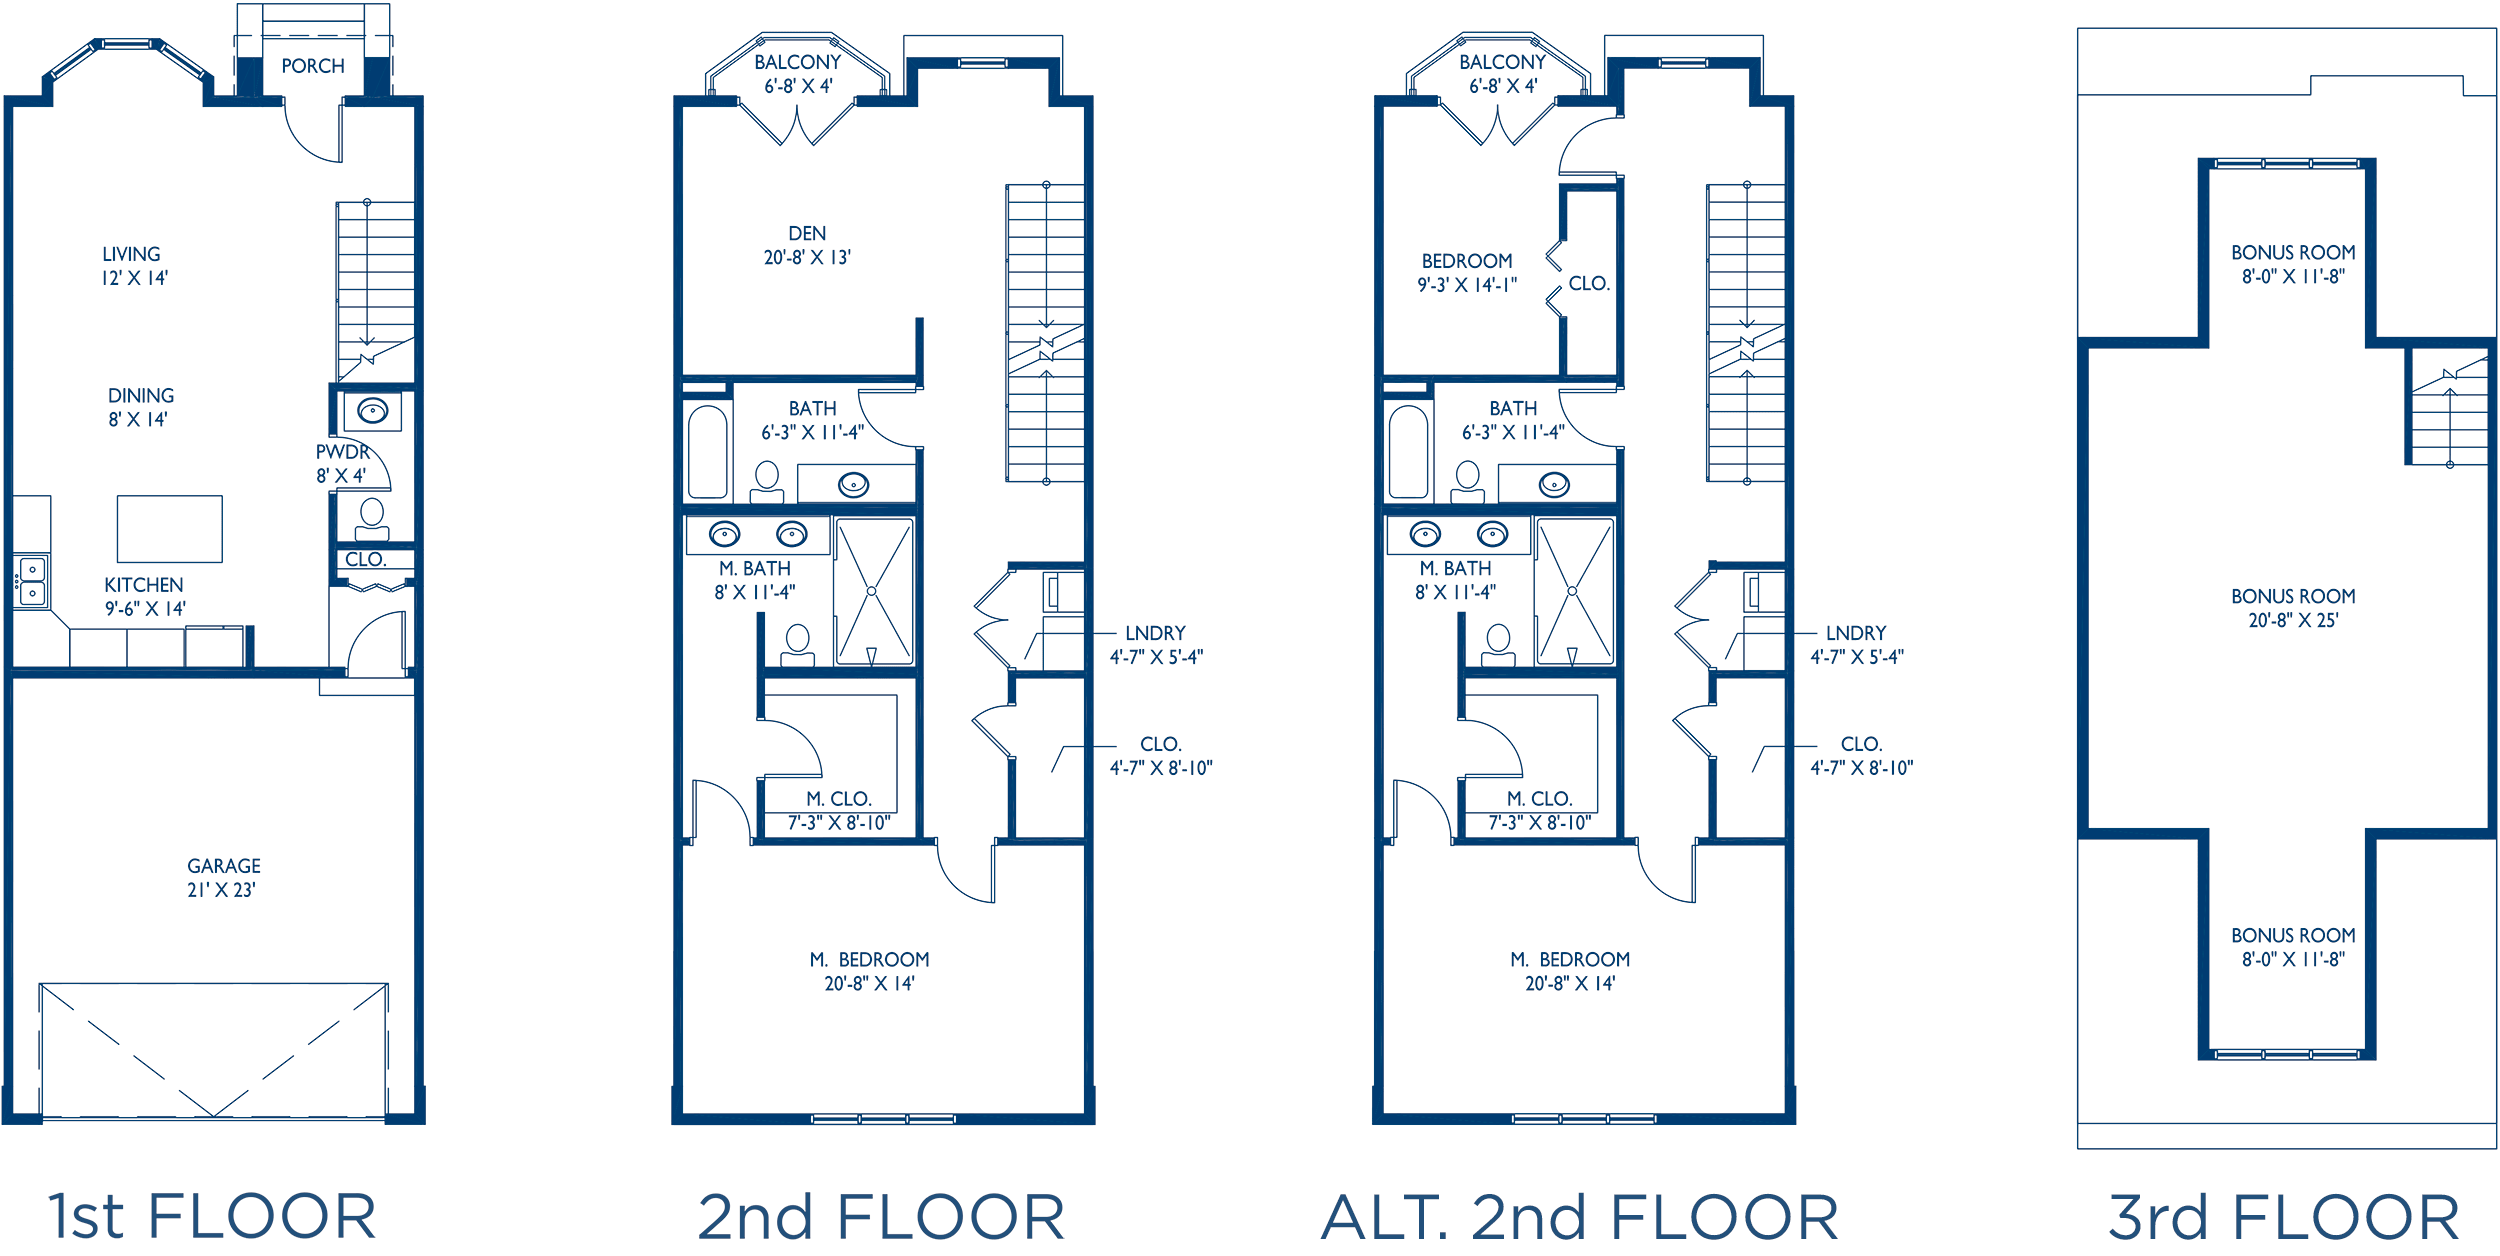 Park Place Townhomes Floor Plans - 2.5 Story